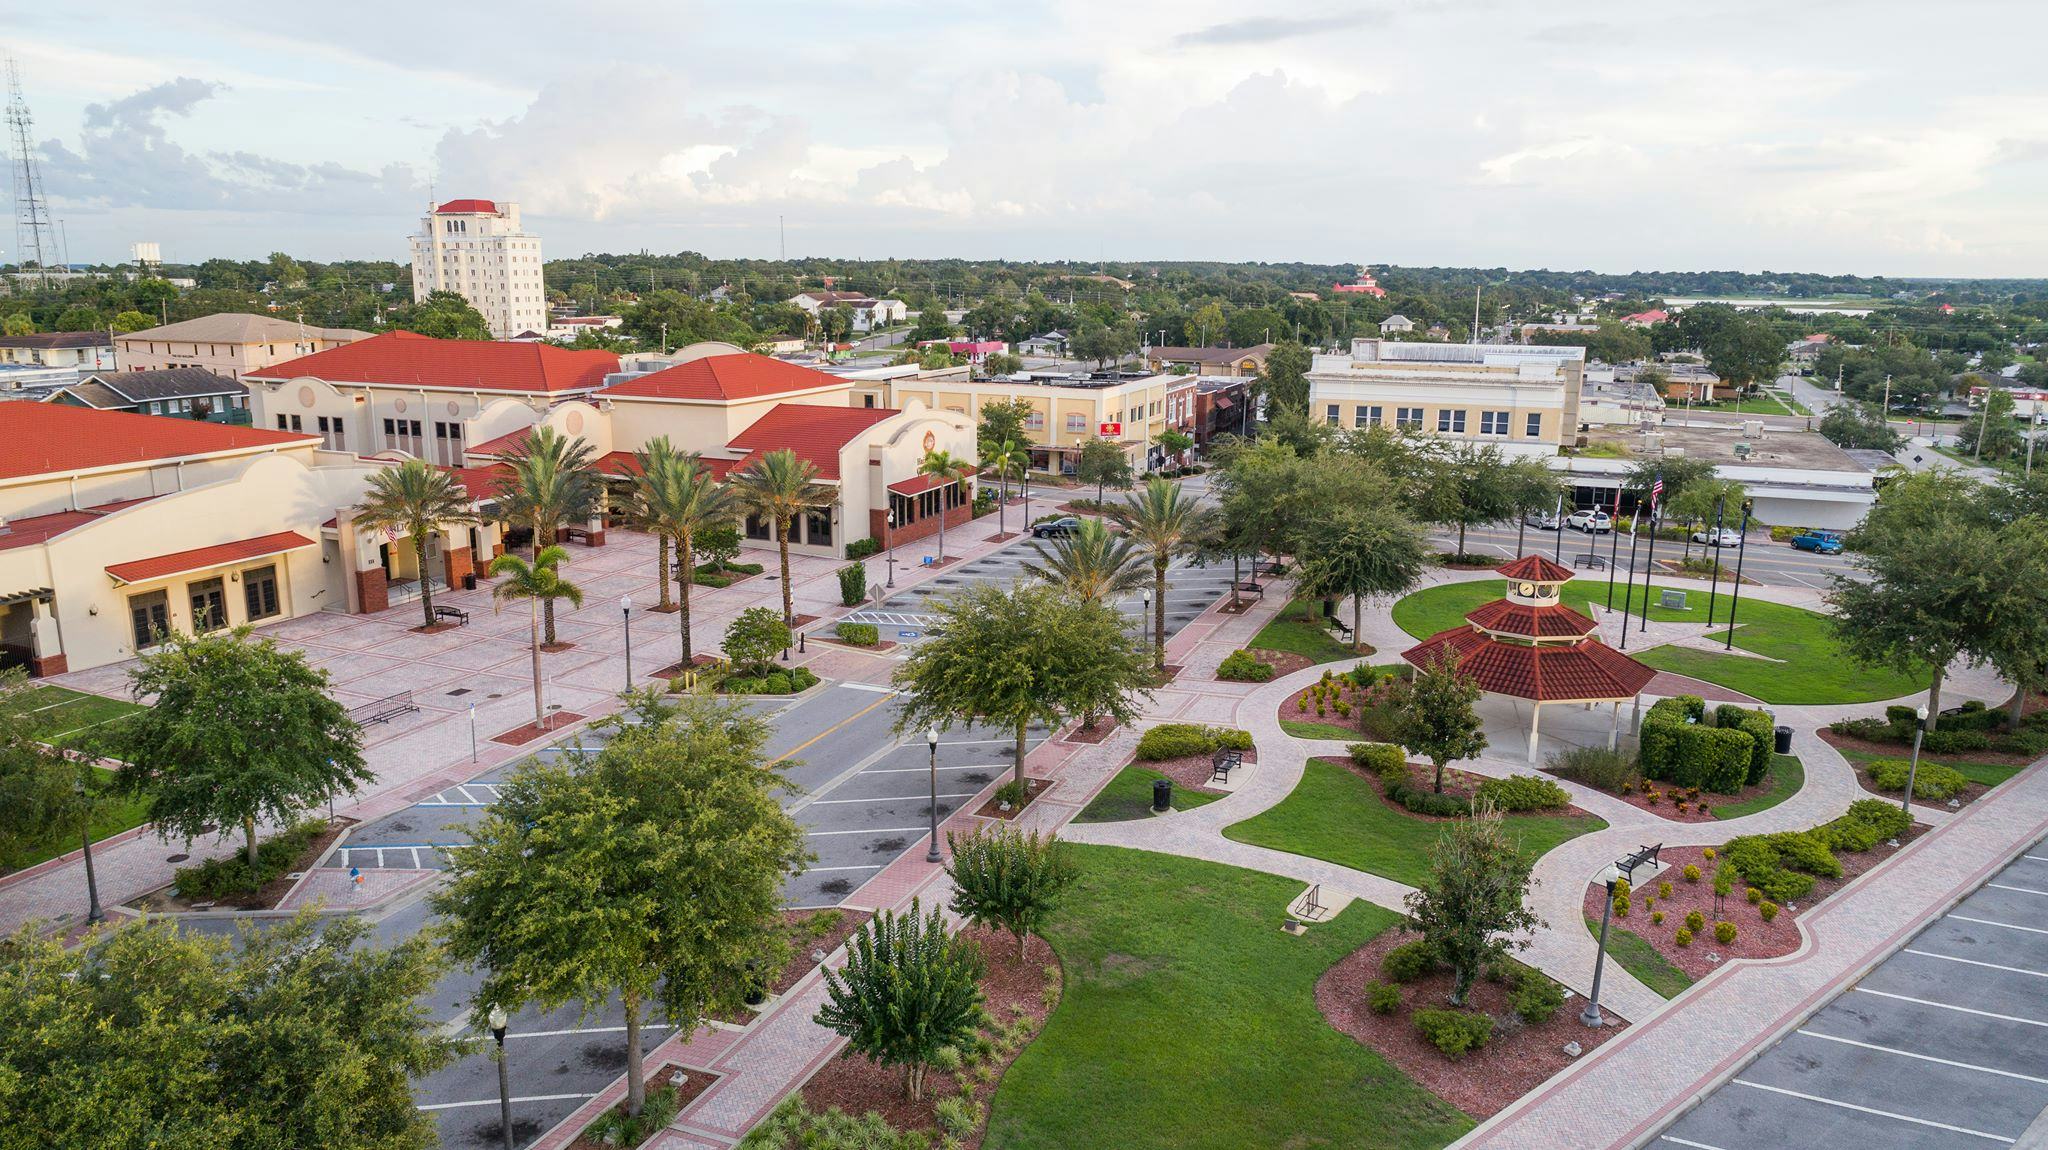 Haines City offers an affordable cost of living in Central Florida